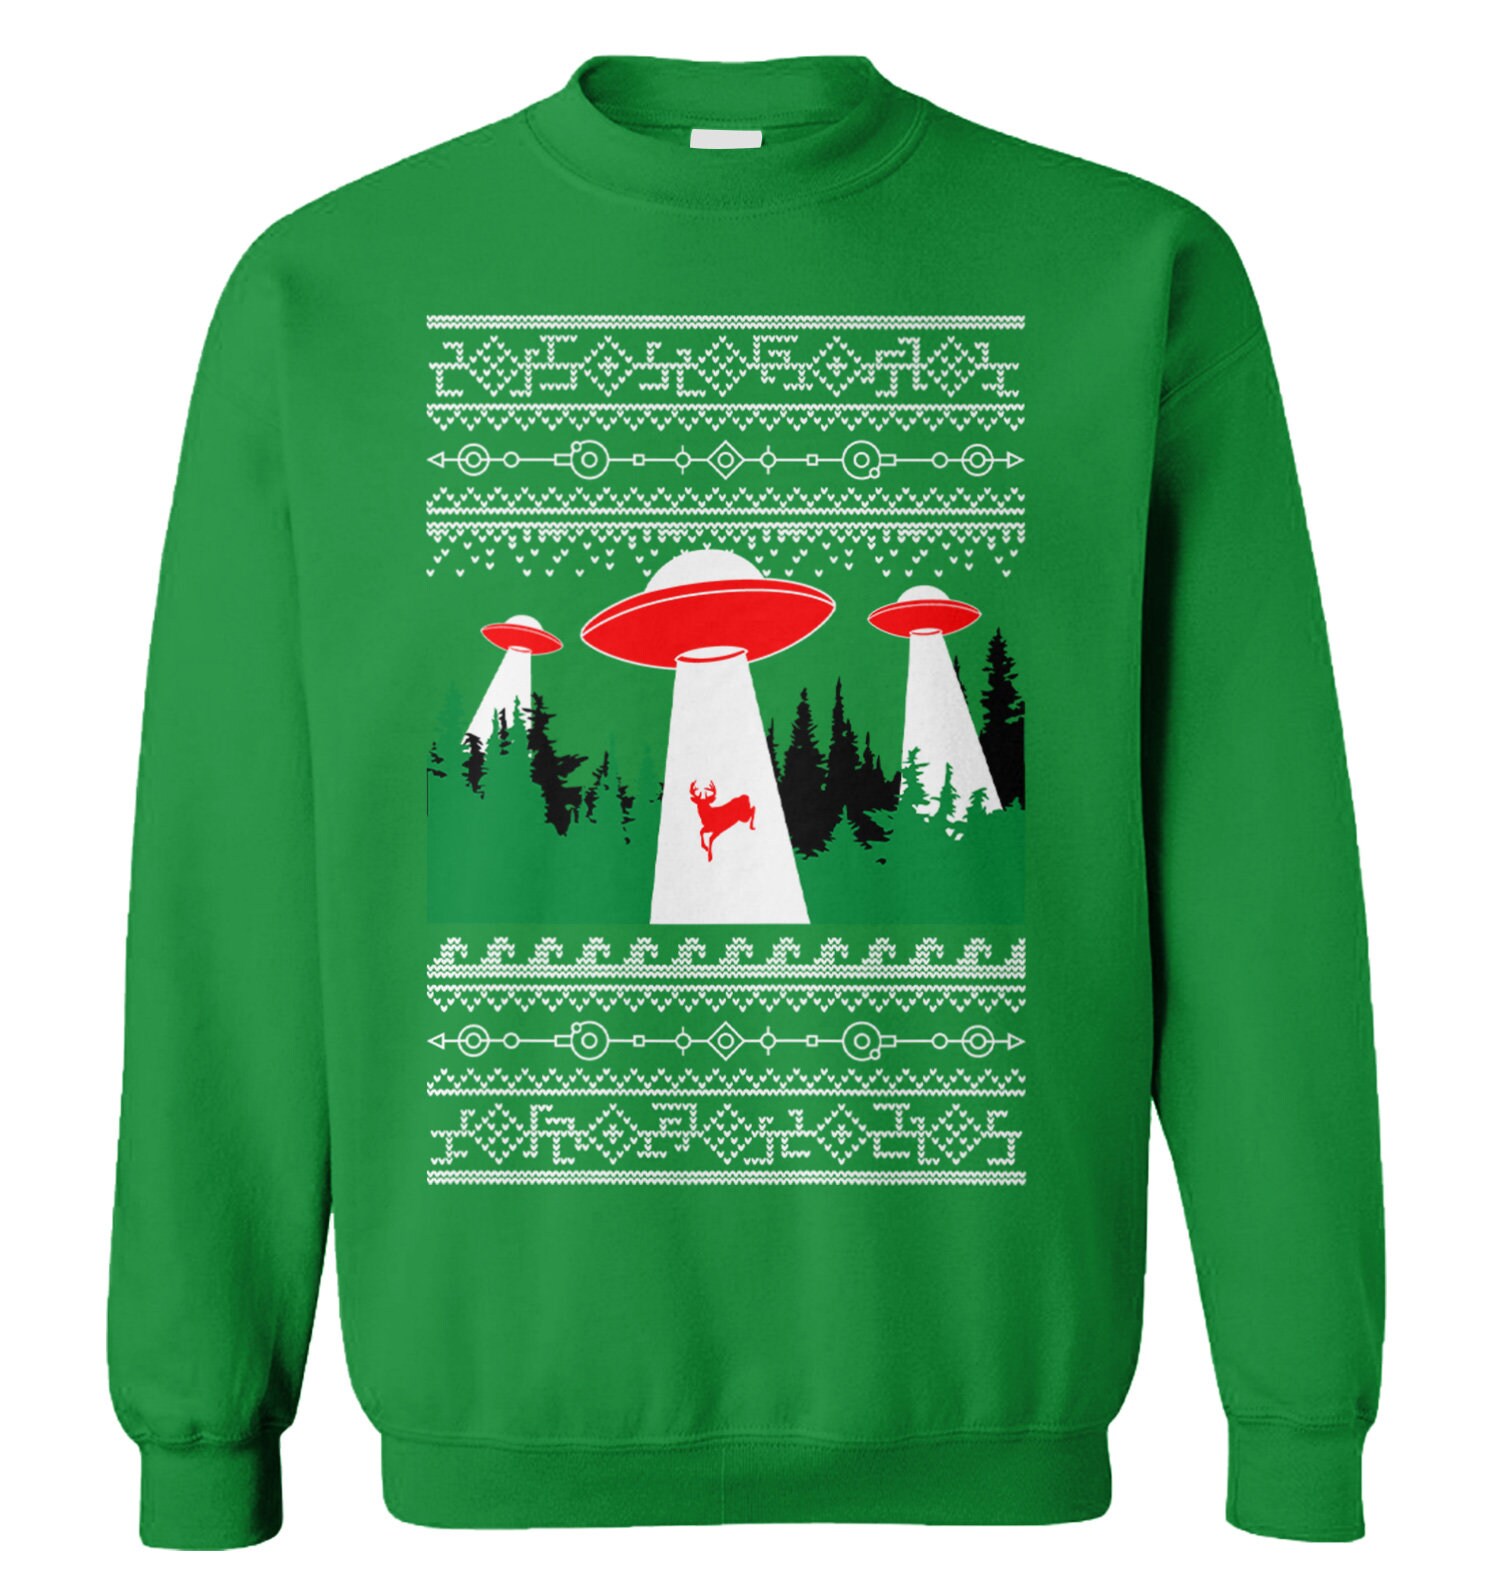 Alien Abduction Ugly Unisex Sweater - Visitors UFO Invasion Extraterrestrial Spaceship Believe Reindeer Sci Fi Merry Xmas Holiday Party